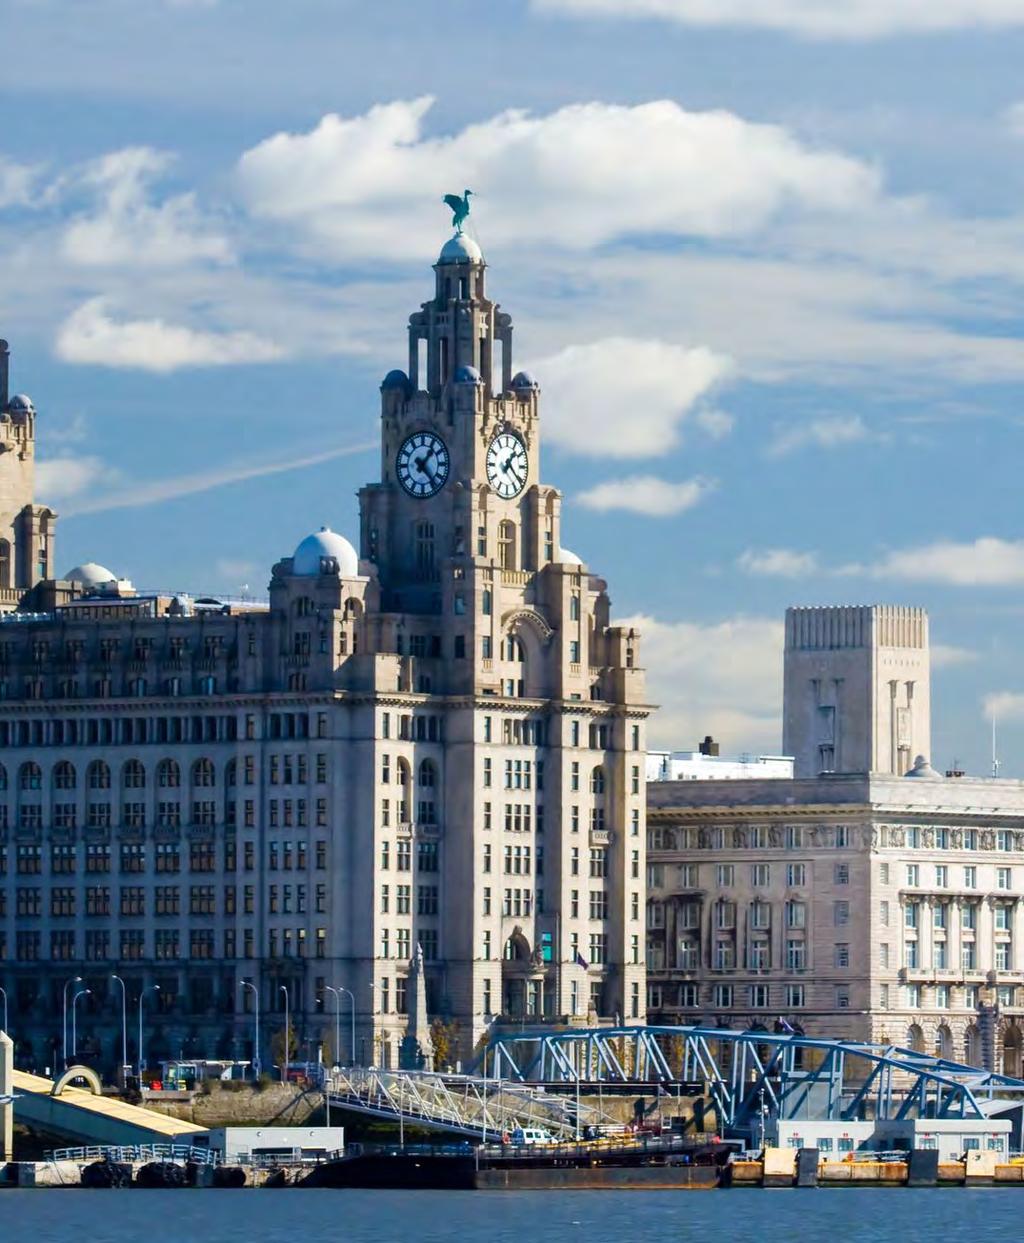 Why Liverpool? Liverpool prides itself as being an innovative and exciting place for investment and business.